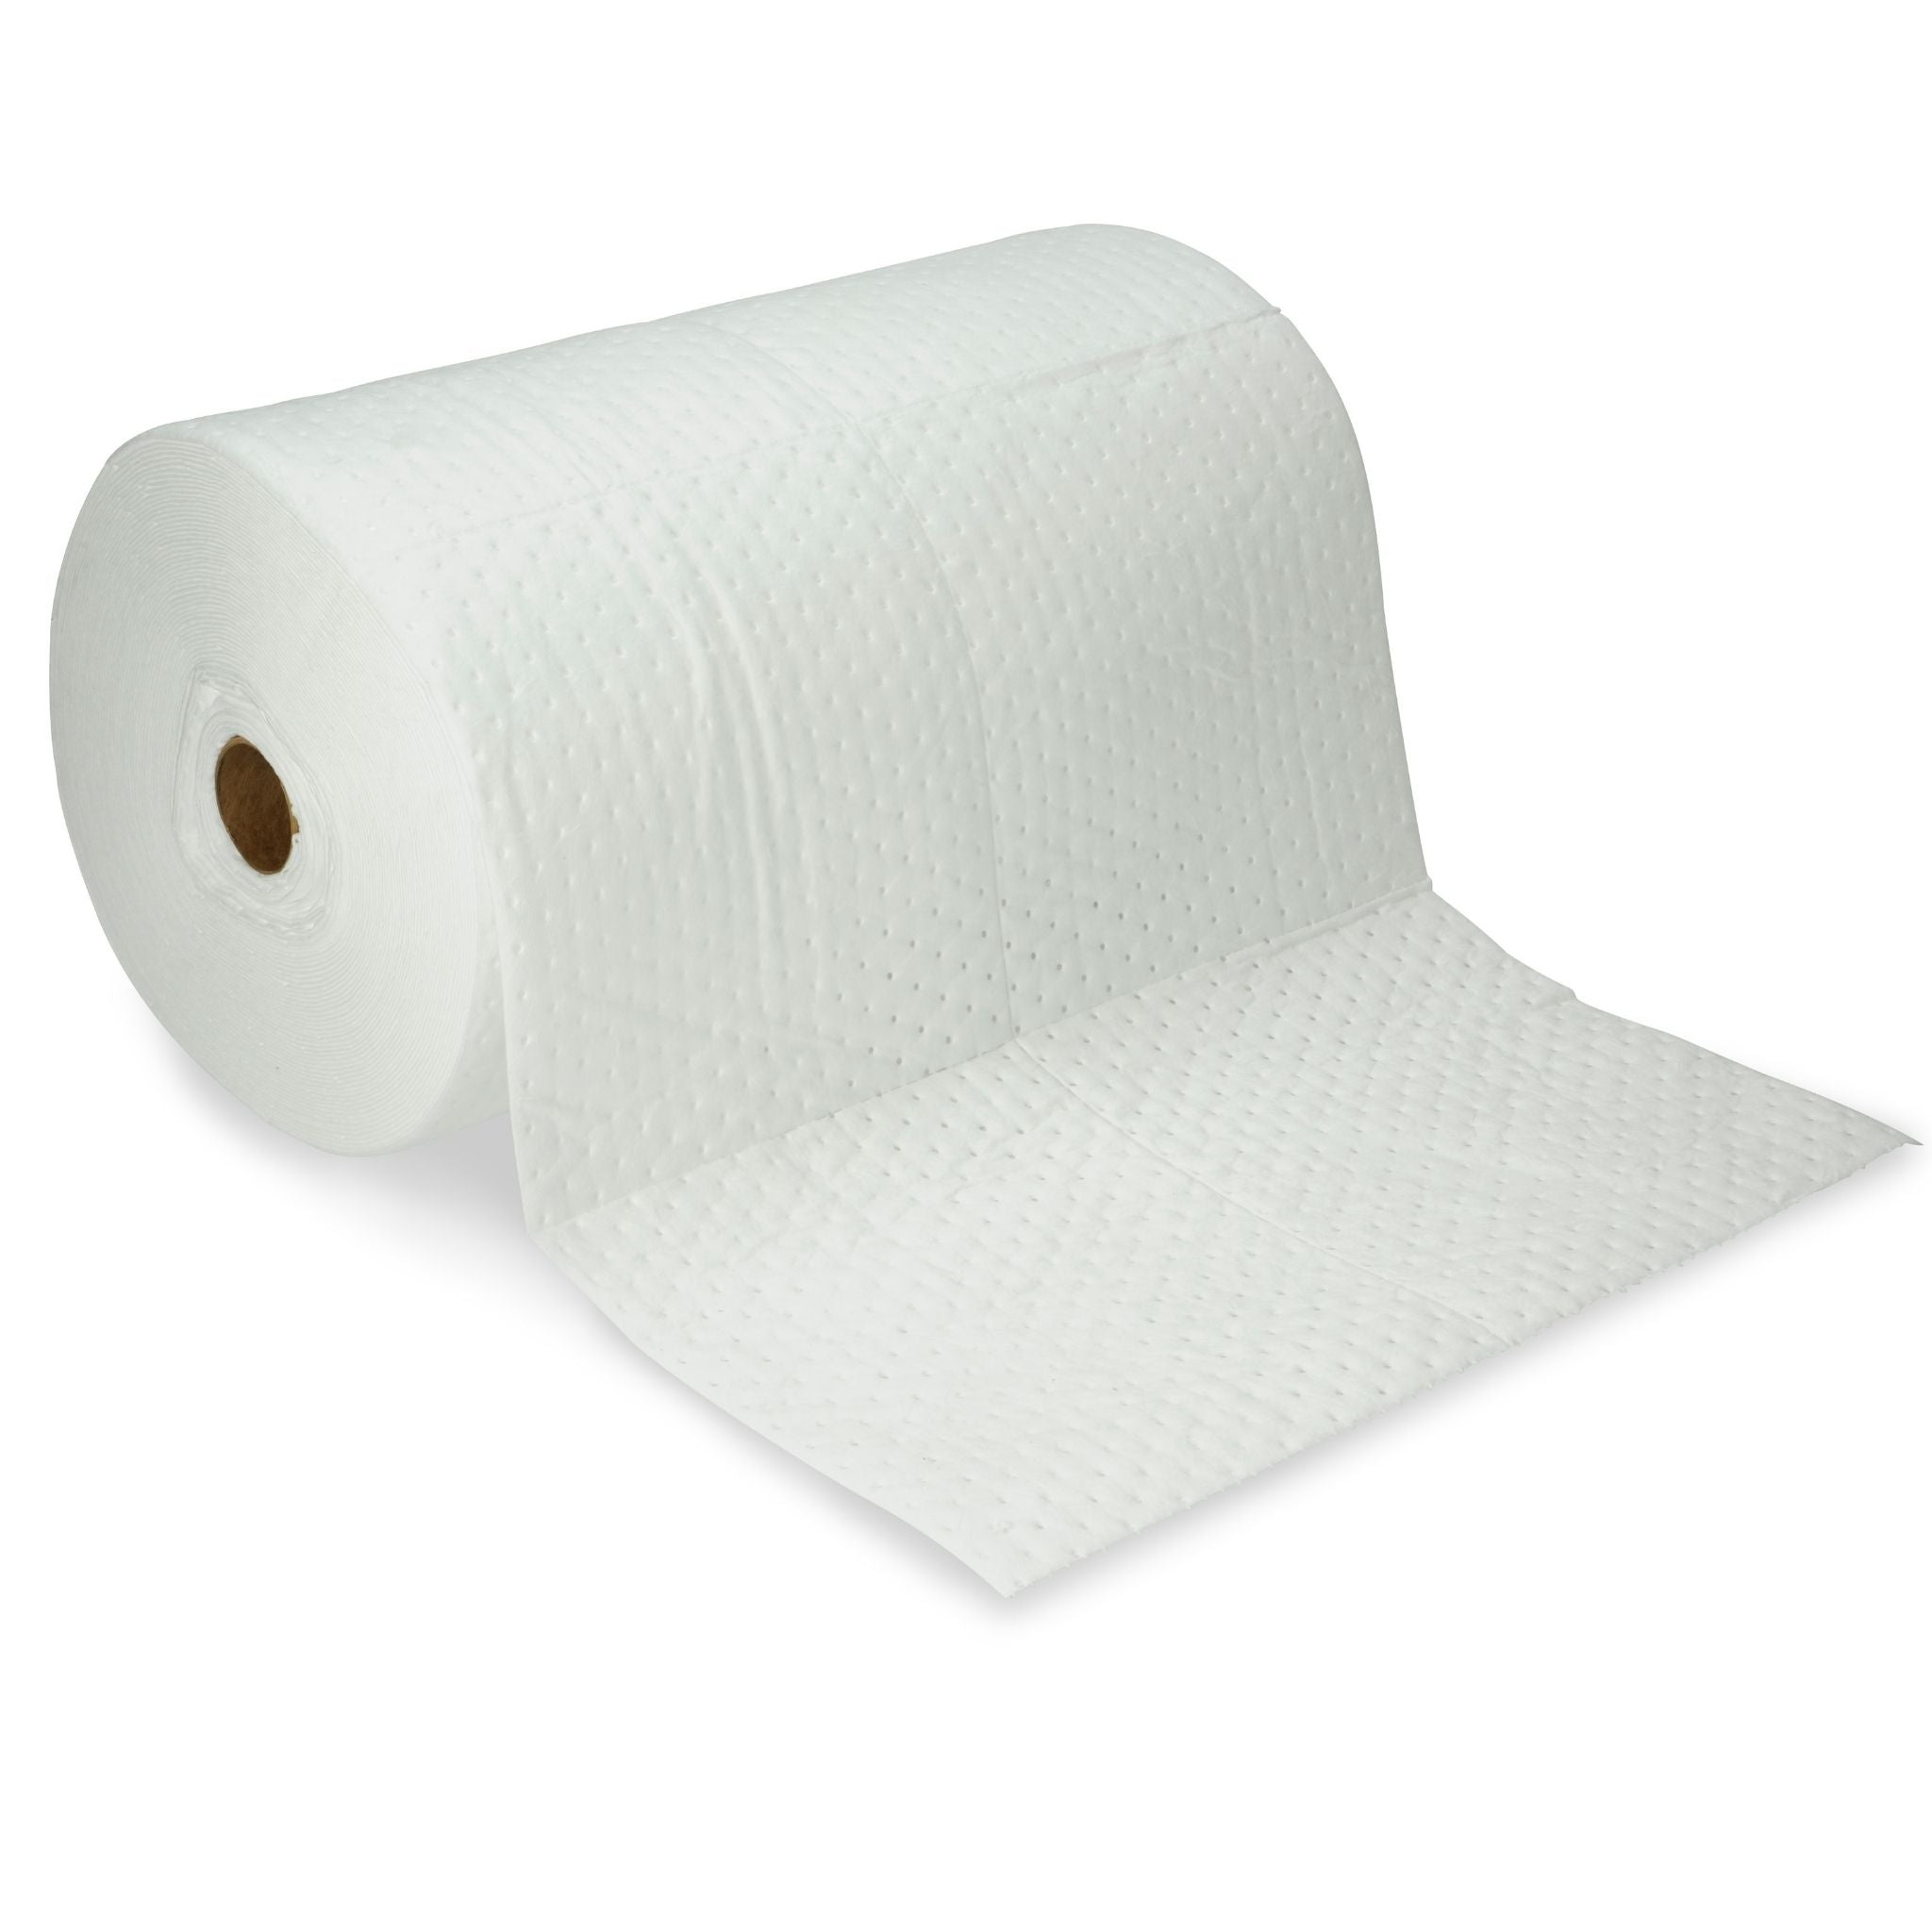 AABACO Oil ONLY White Absorbent Roll - 30" X 150' - Heavy Weight